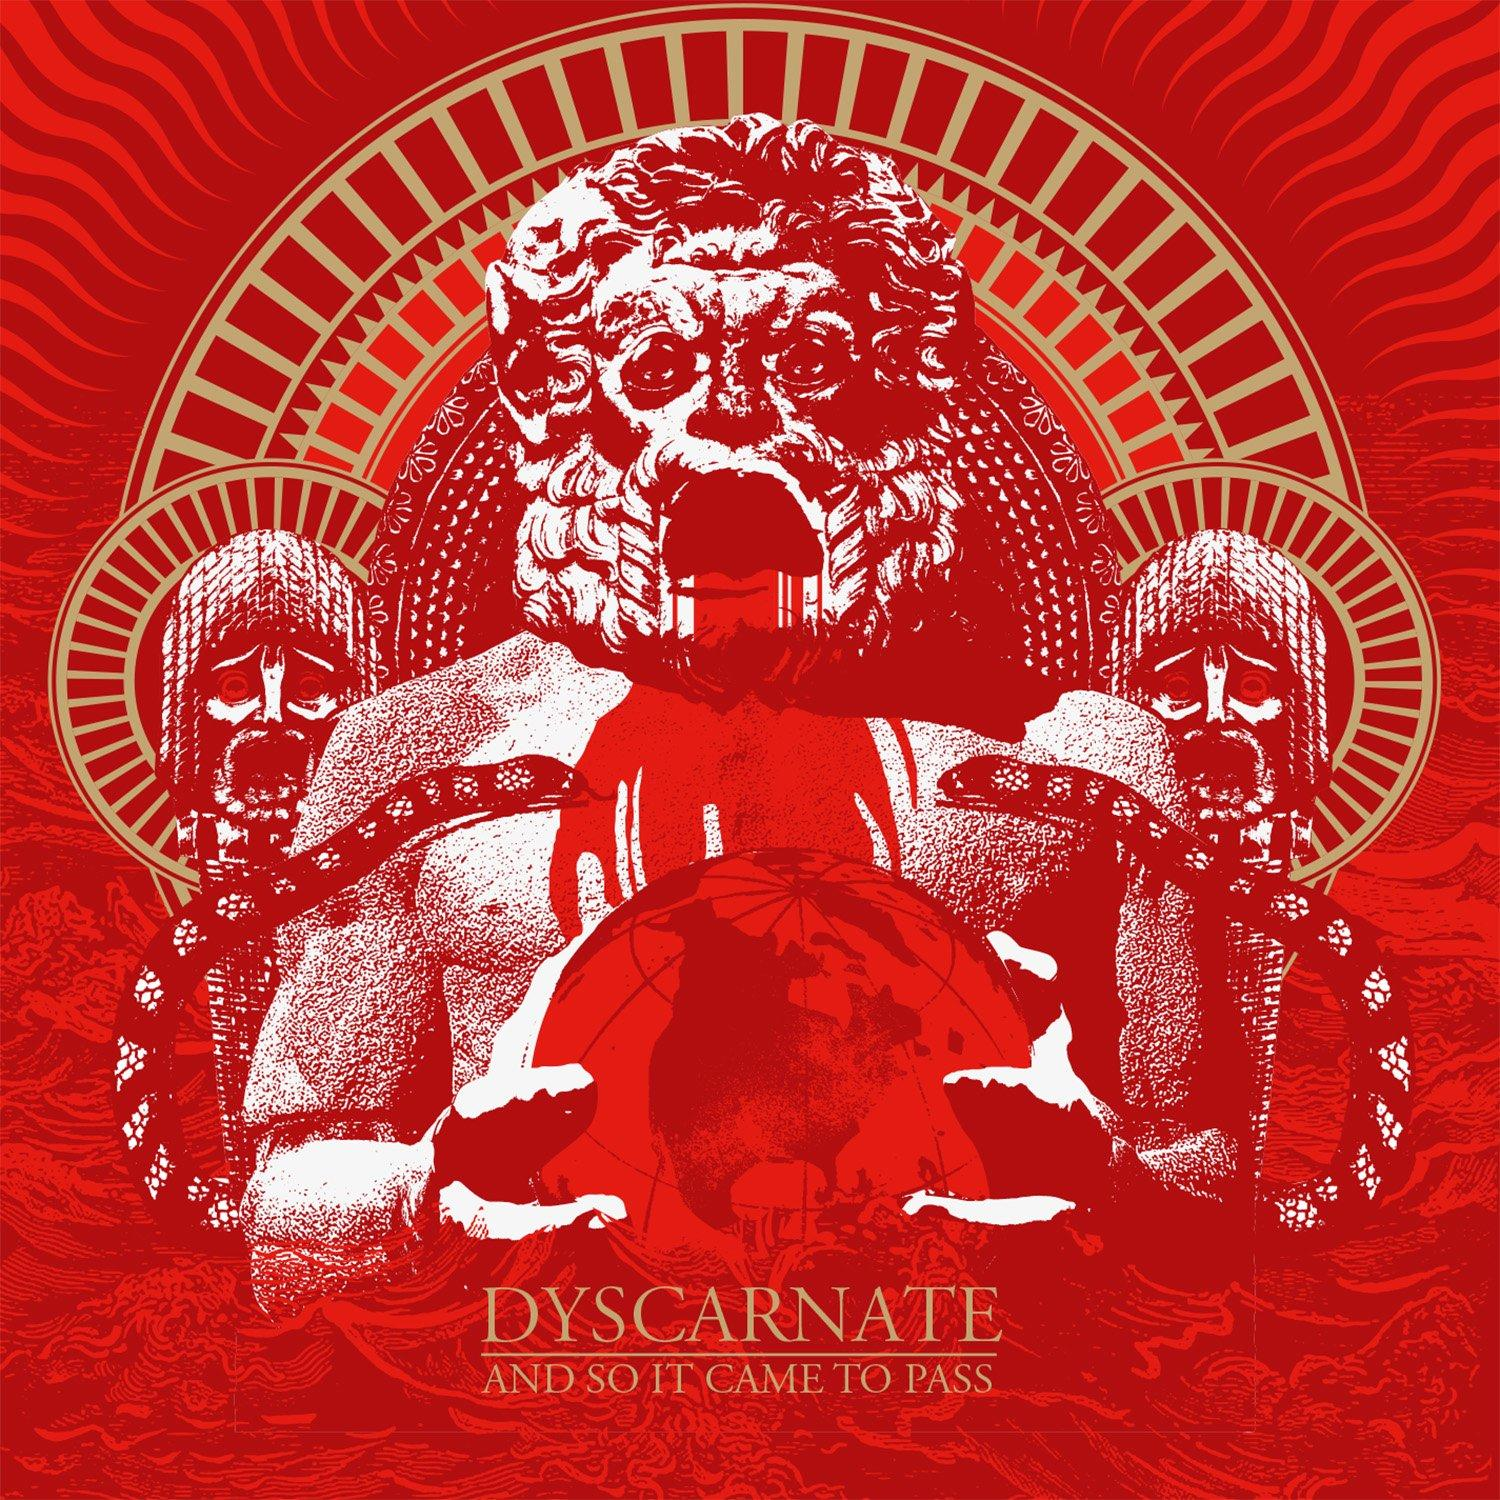 Dyscarnate - AND SO IT - TO CAME PASS (Vinyl)